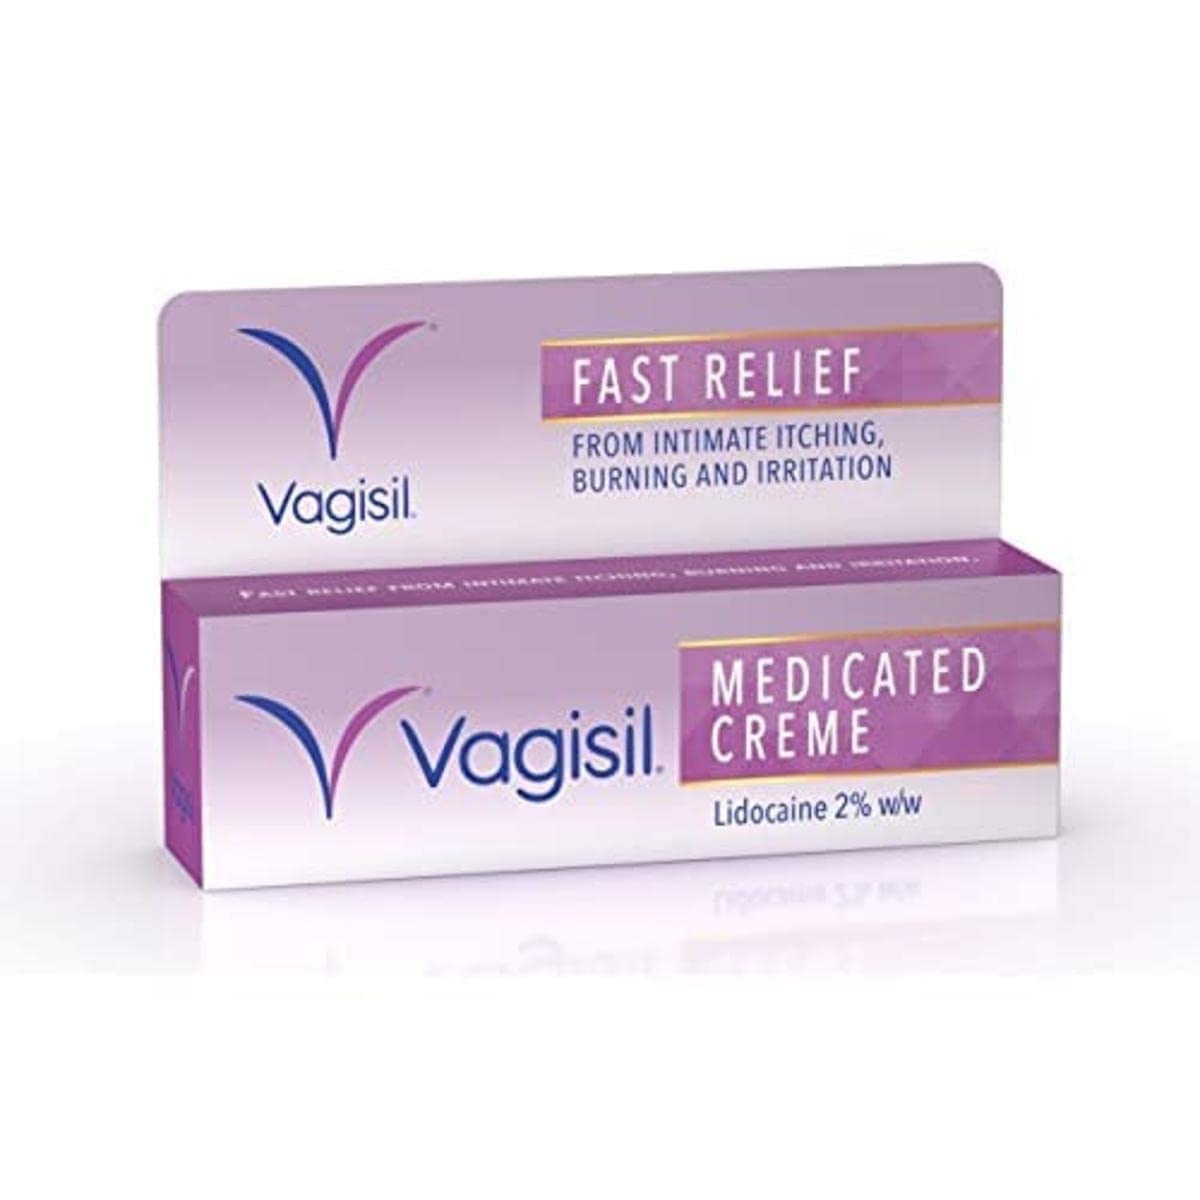 Vagisil Medicated Cream Fast Relief from Feminine Itching – 30g   price checker   price checker Description Gallery Reviews